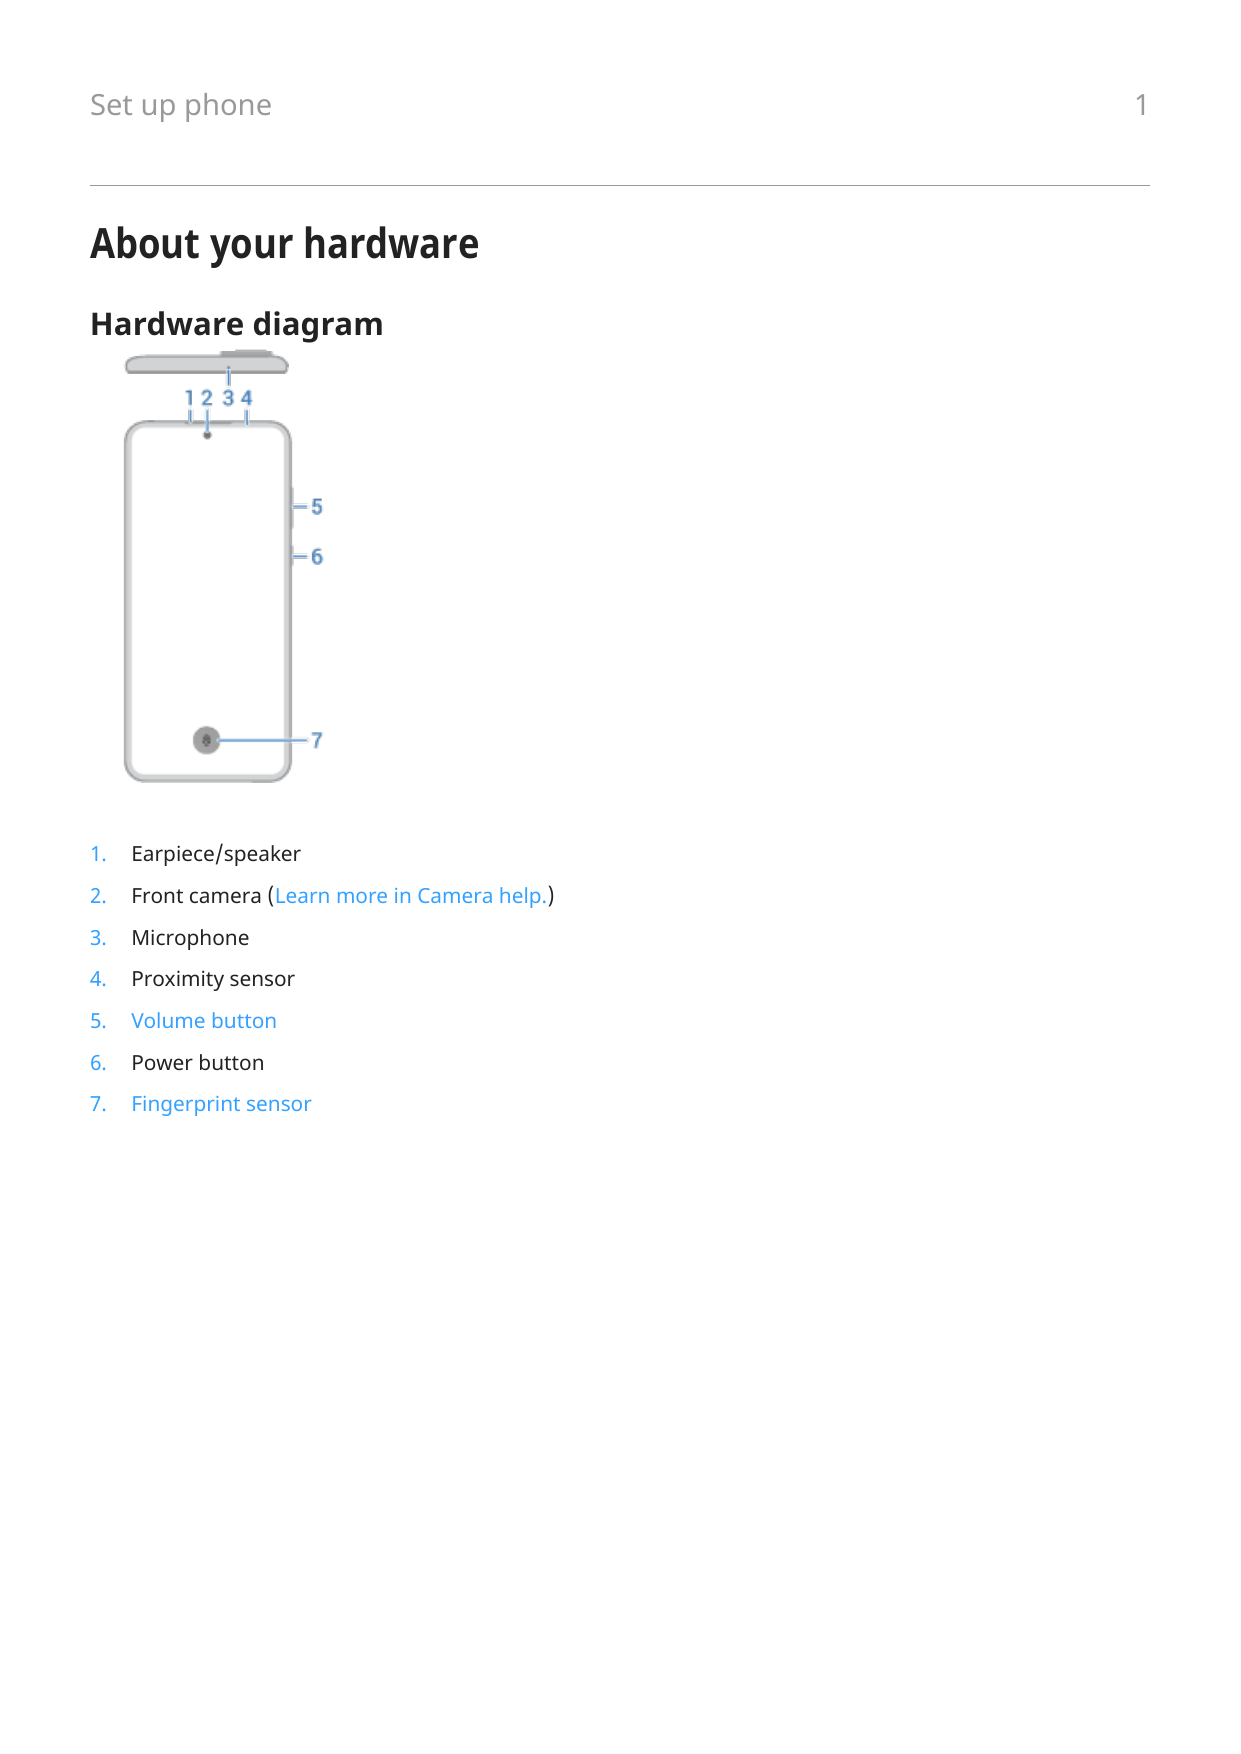 Set up phoneAbout your hardwareHardware diagram1.Earpiece/speaker2.Front camera (Learn more in Camera help.)3.Microphone4.Proxim